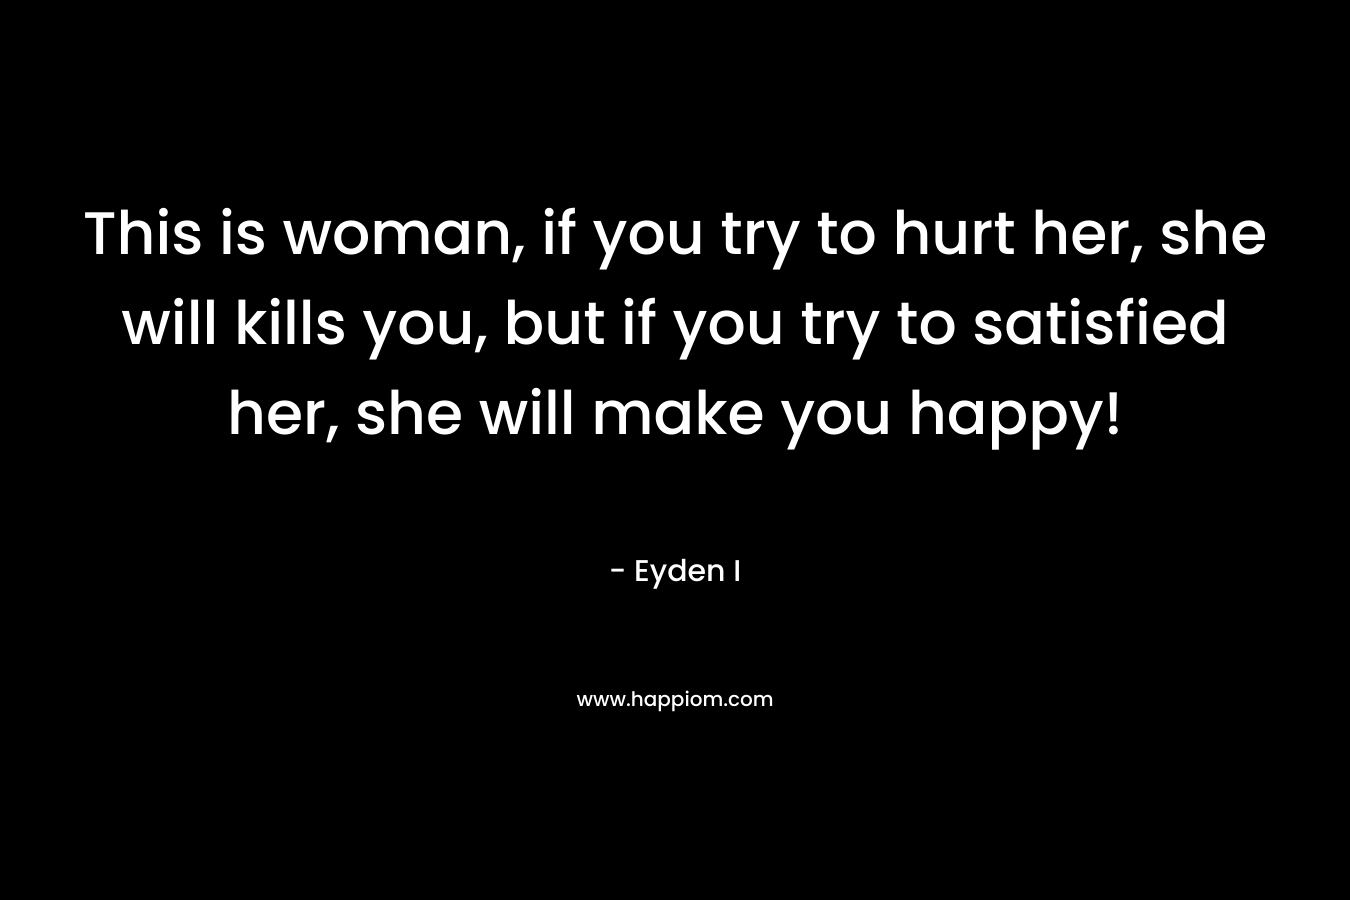 This is woman, if you try to hurt her, she will kills you, but if you try to satisfied her, she will make you happy! – Eyden I